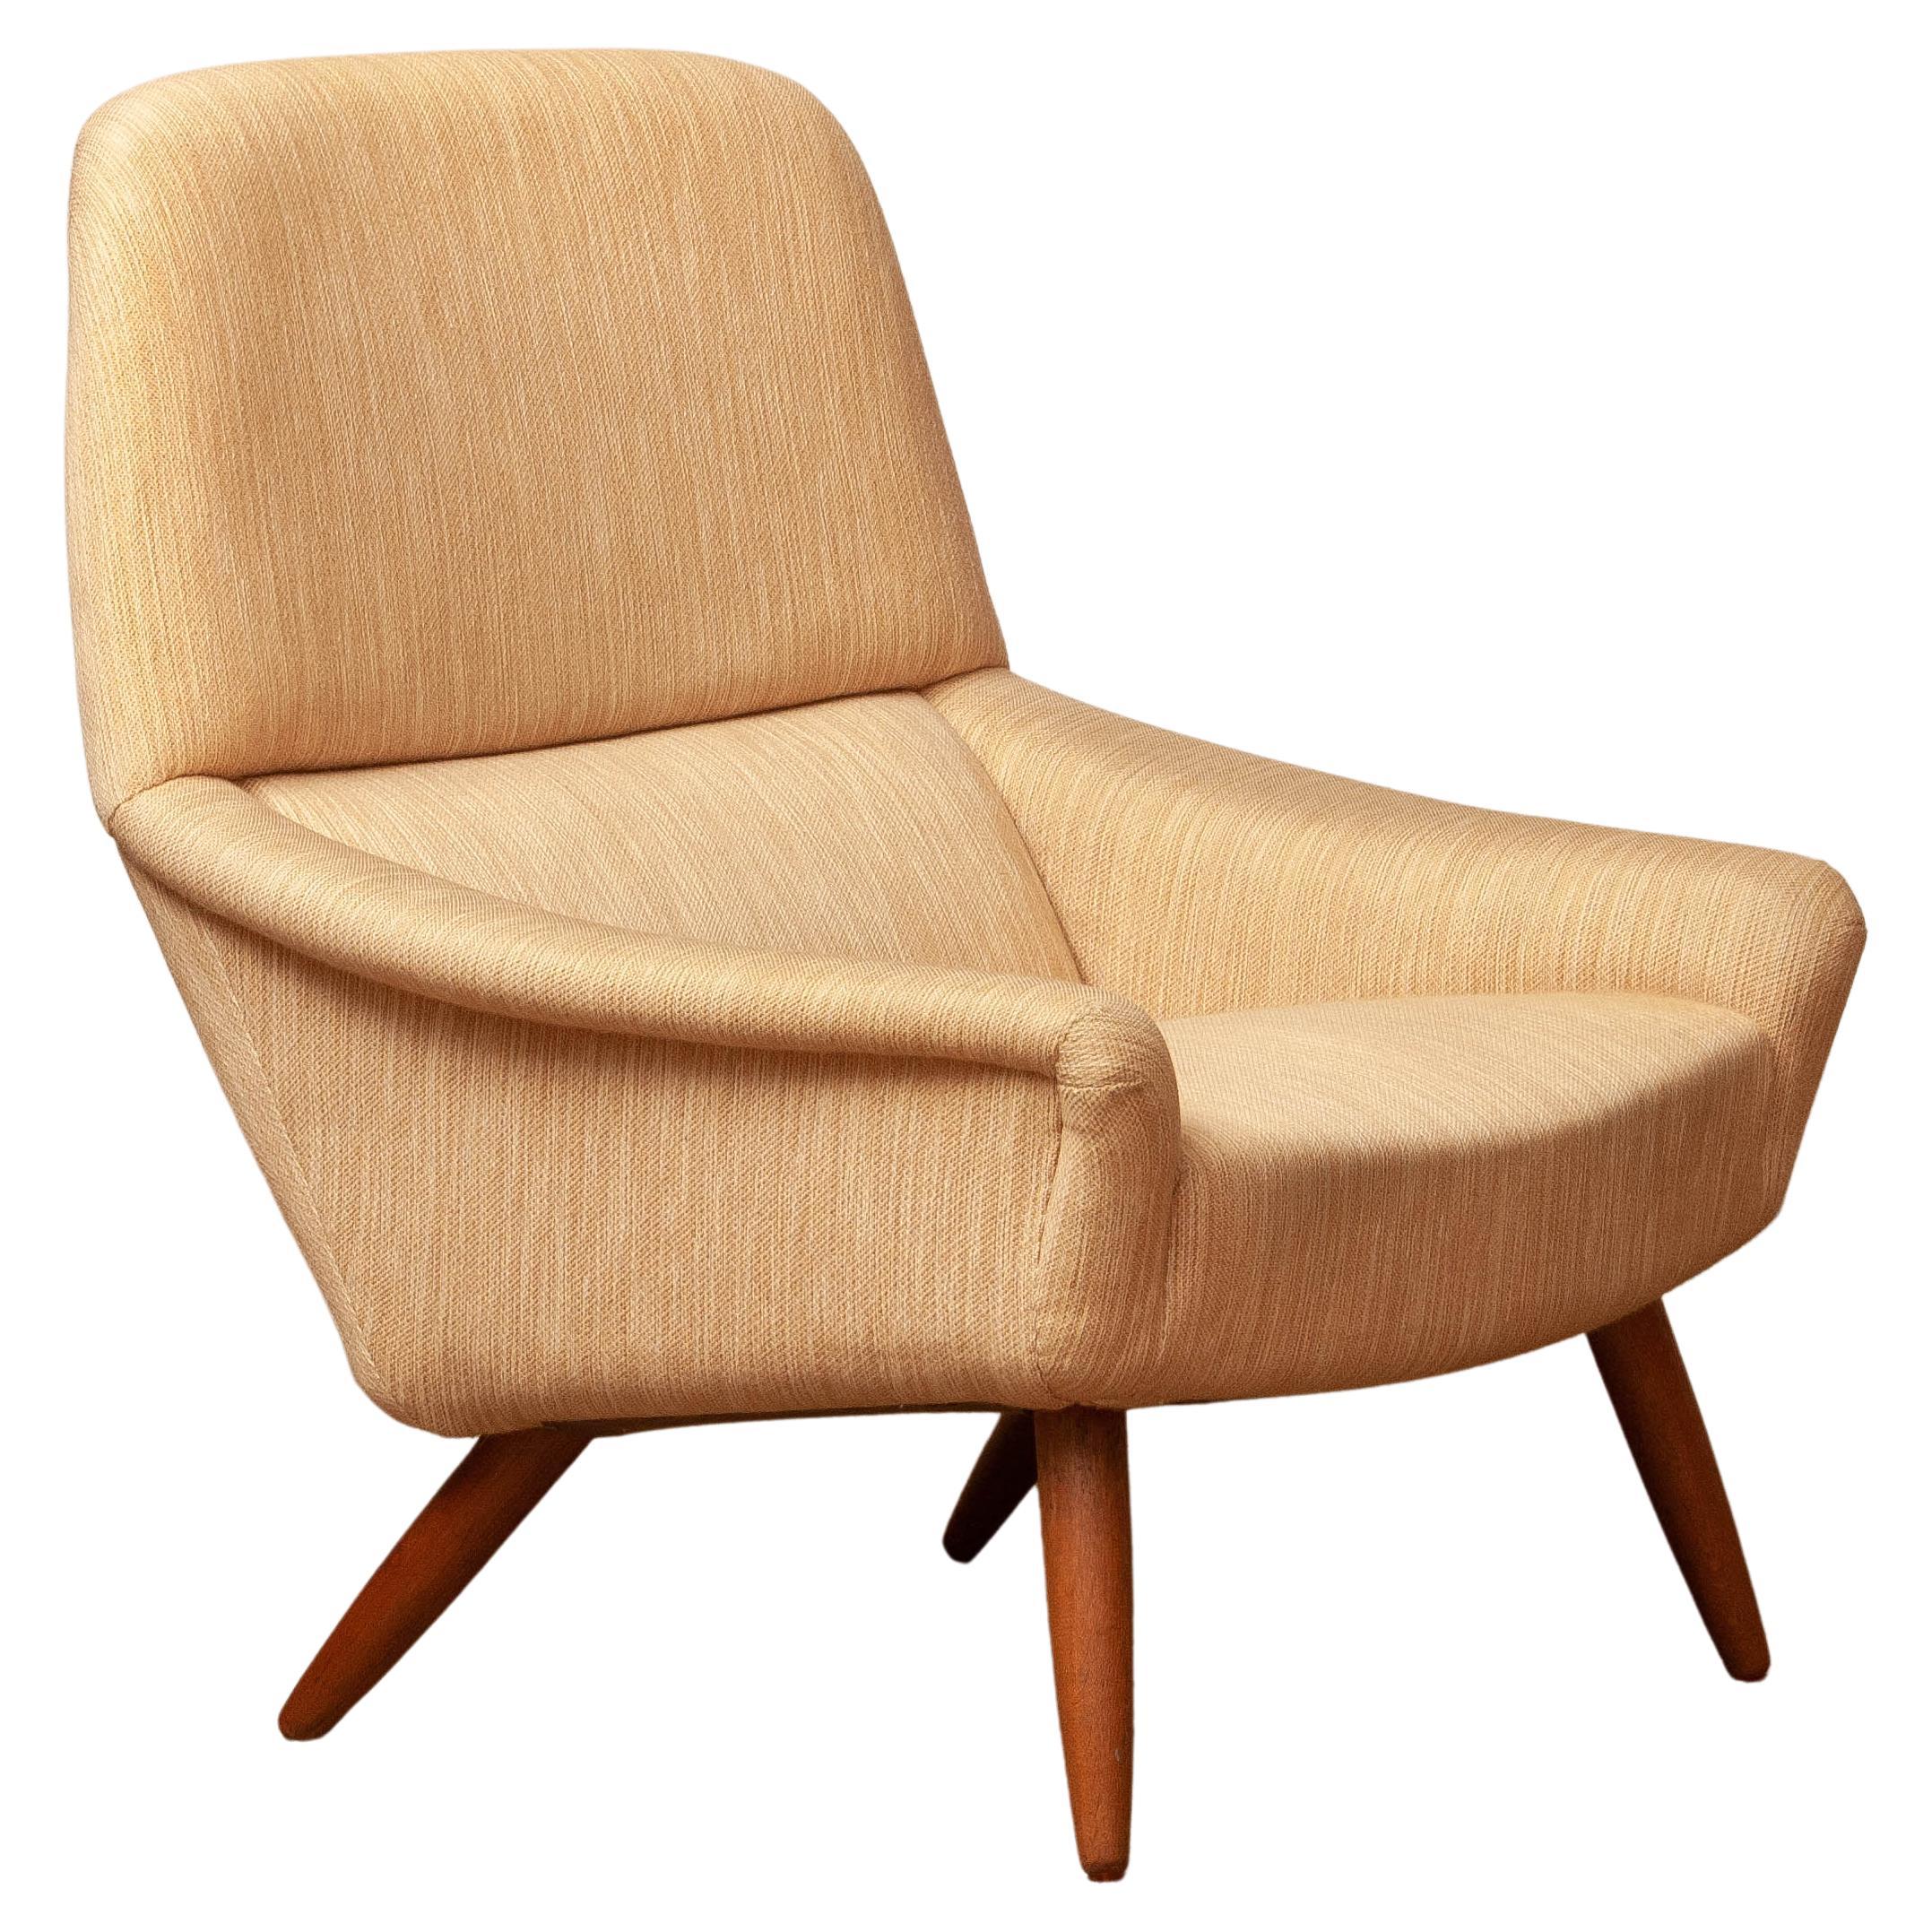 1960s Natural High Back Lounge Chair by Leif Hansen for Kronen in Denmark For Sale